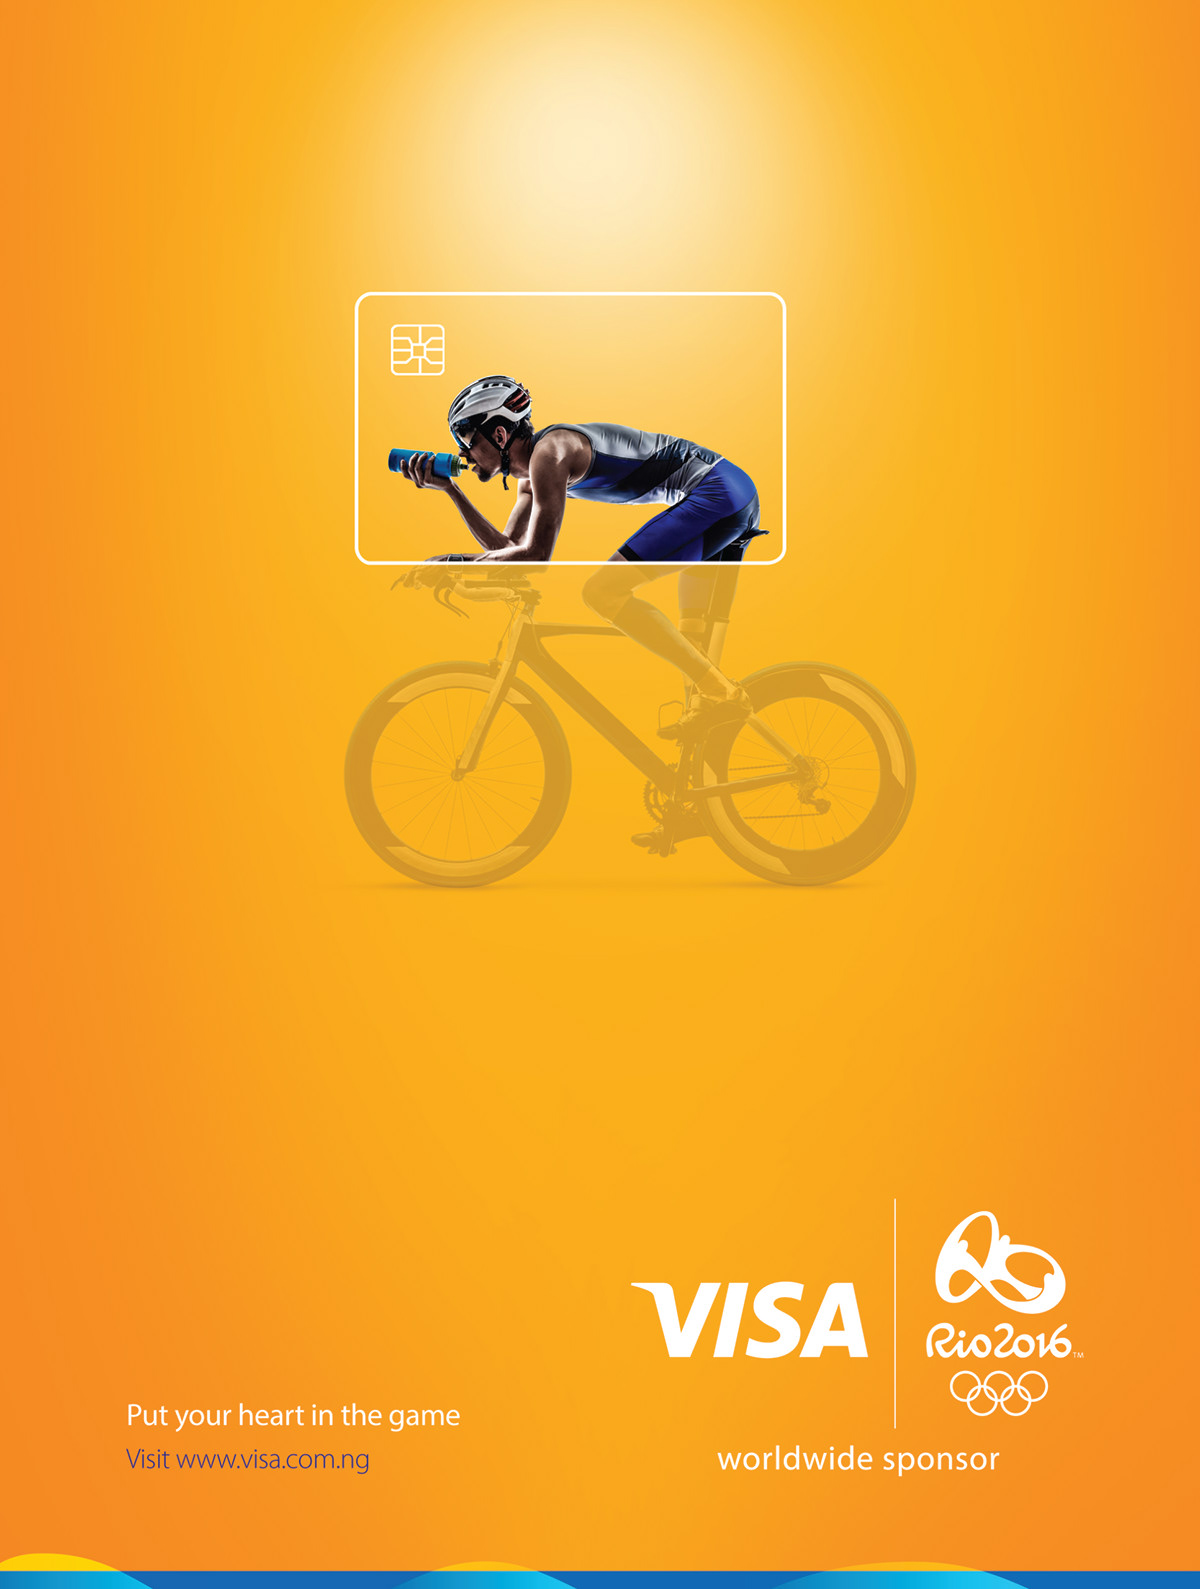 campaign Olympic Games Olympics payment rio2016 Shopping Visa visa card